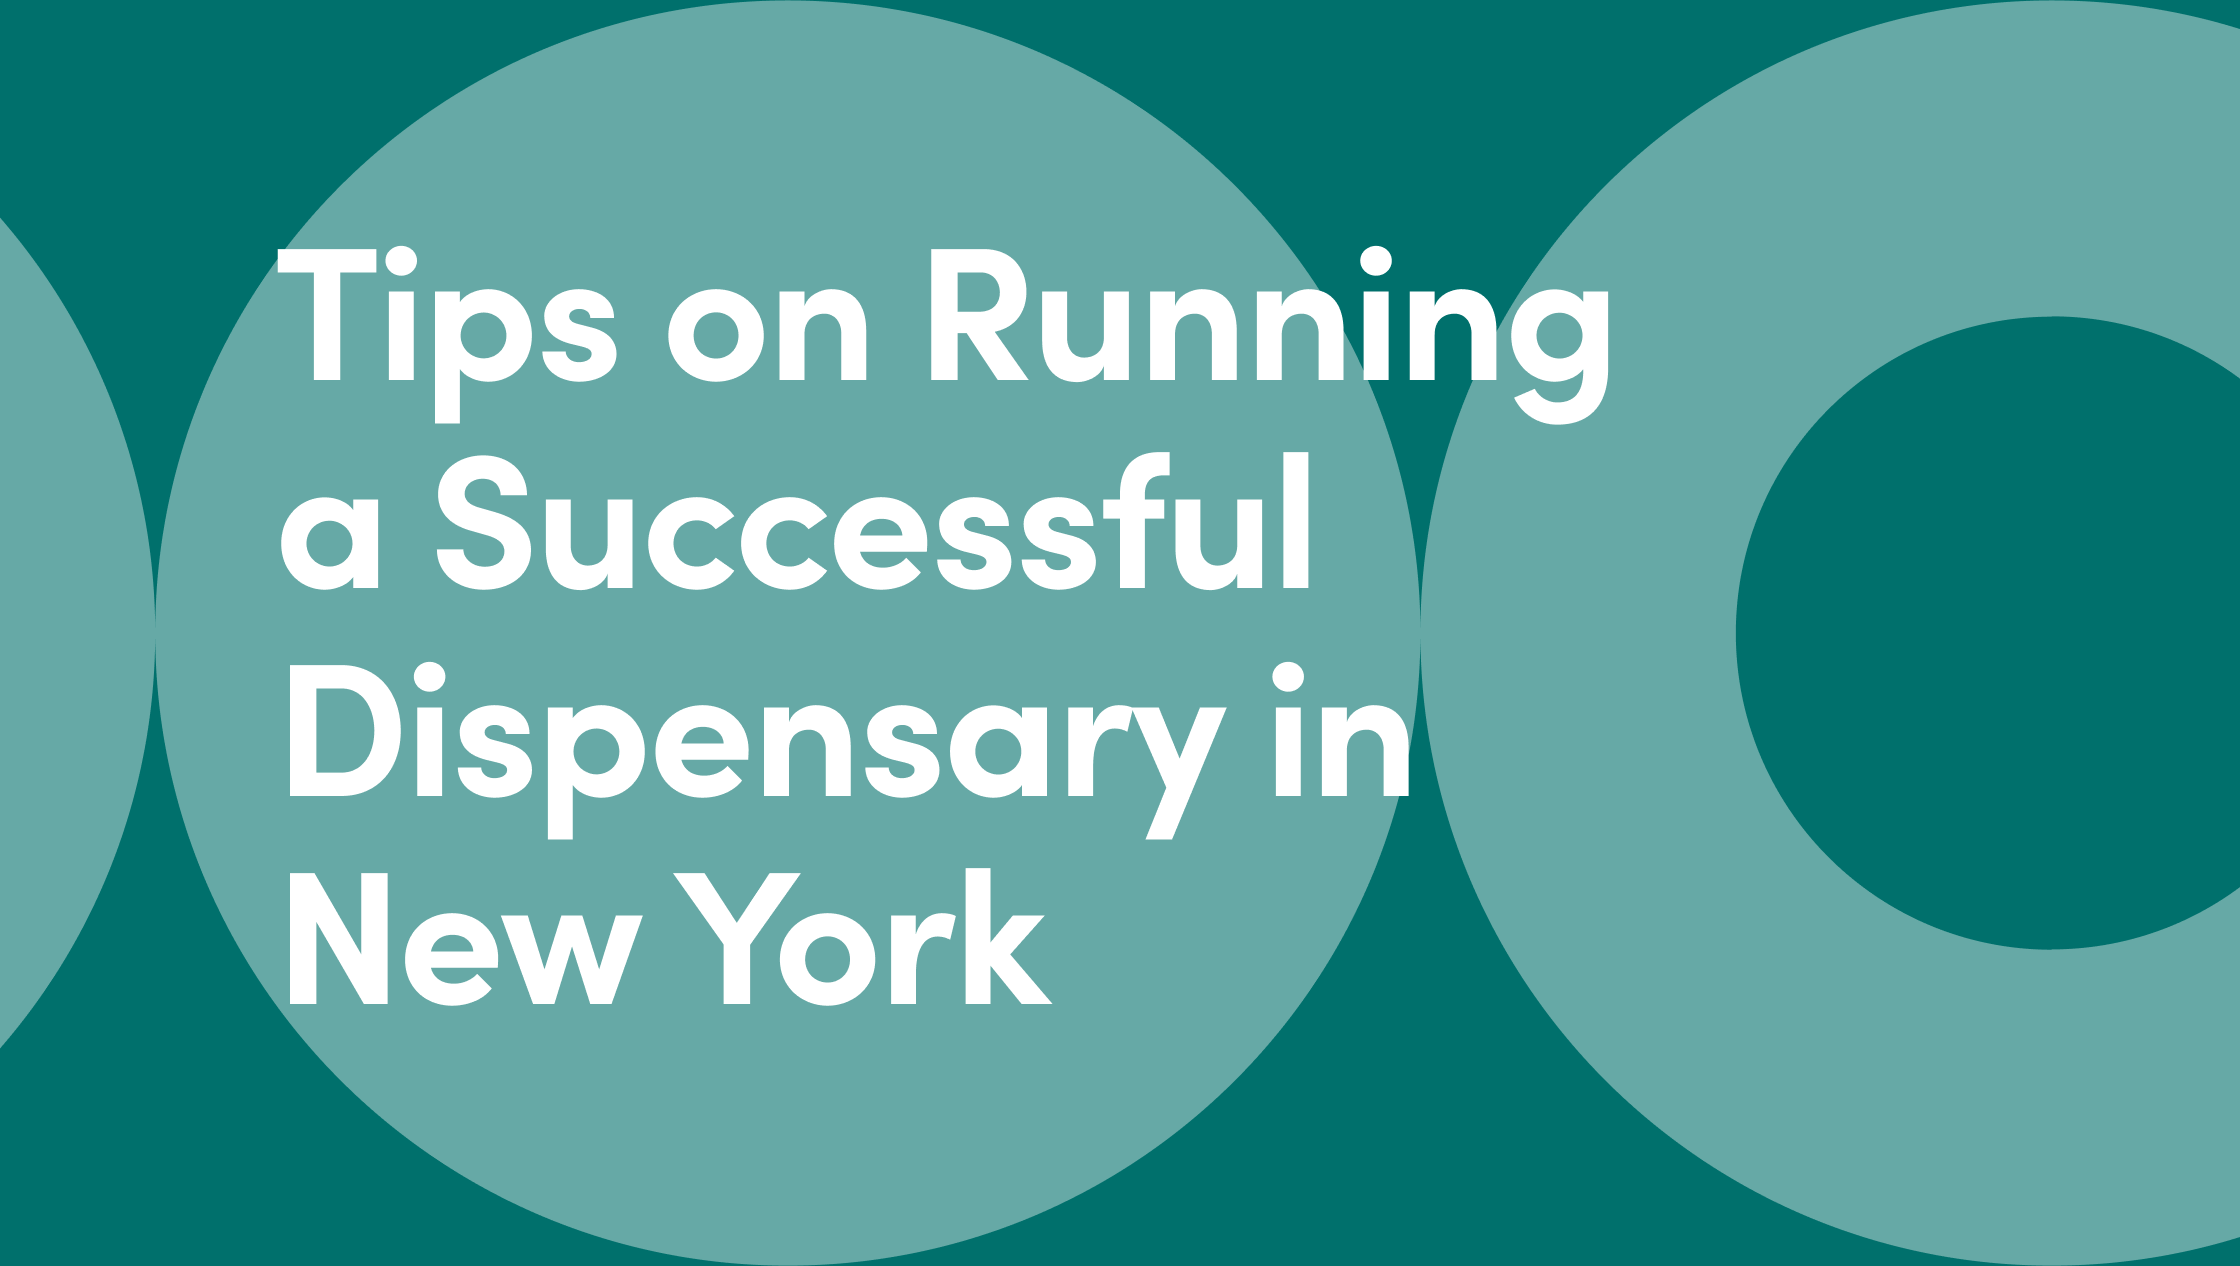 Tips on Running a Successful Dispensary in New York